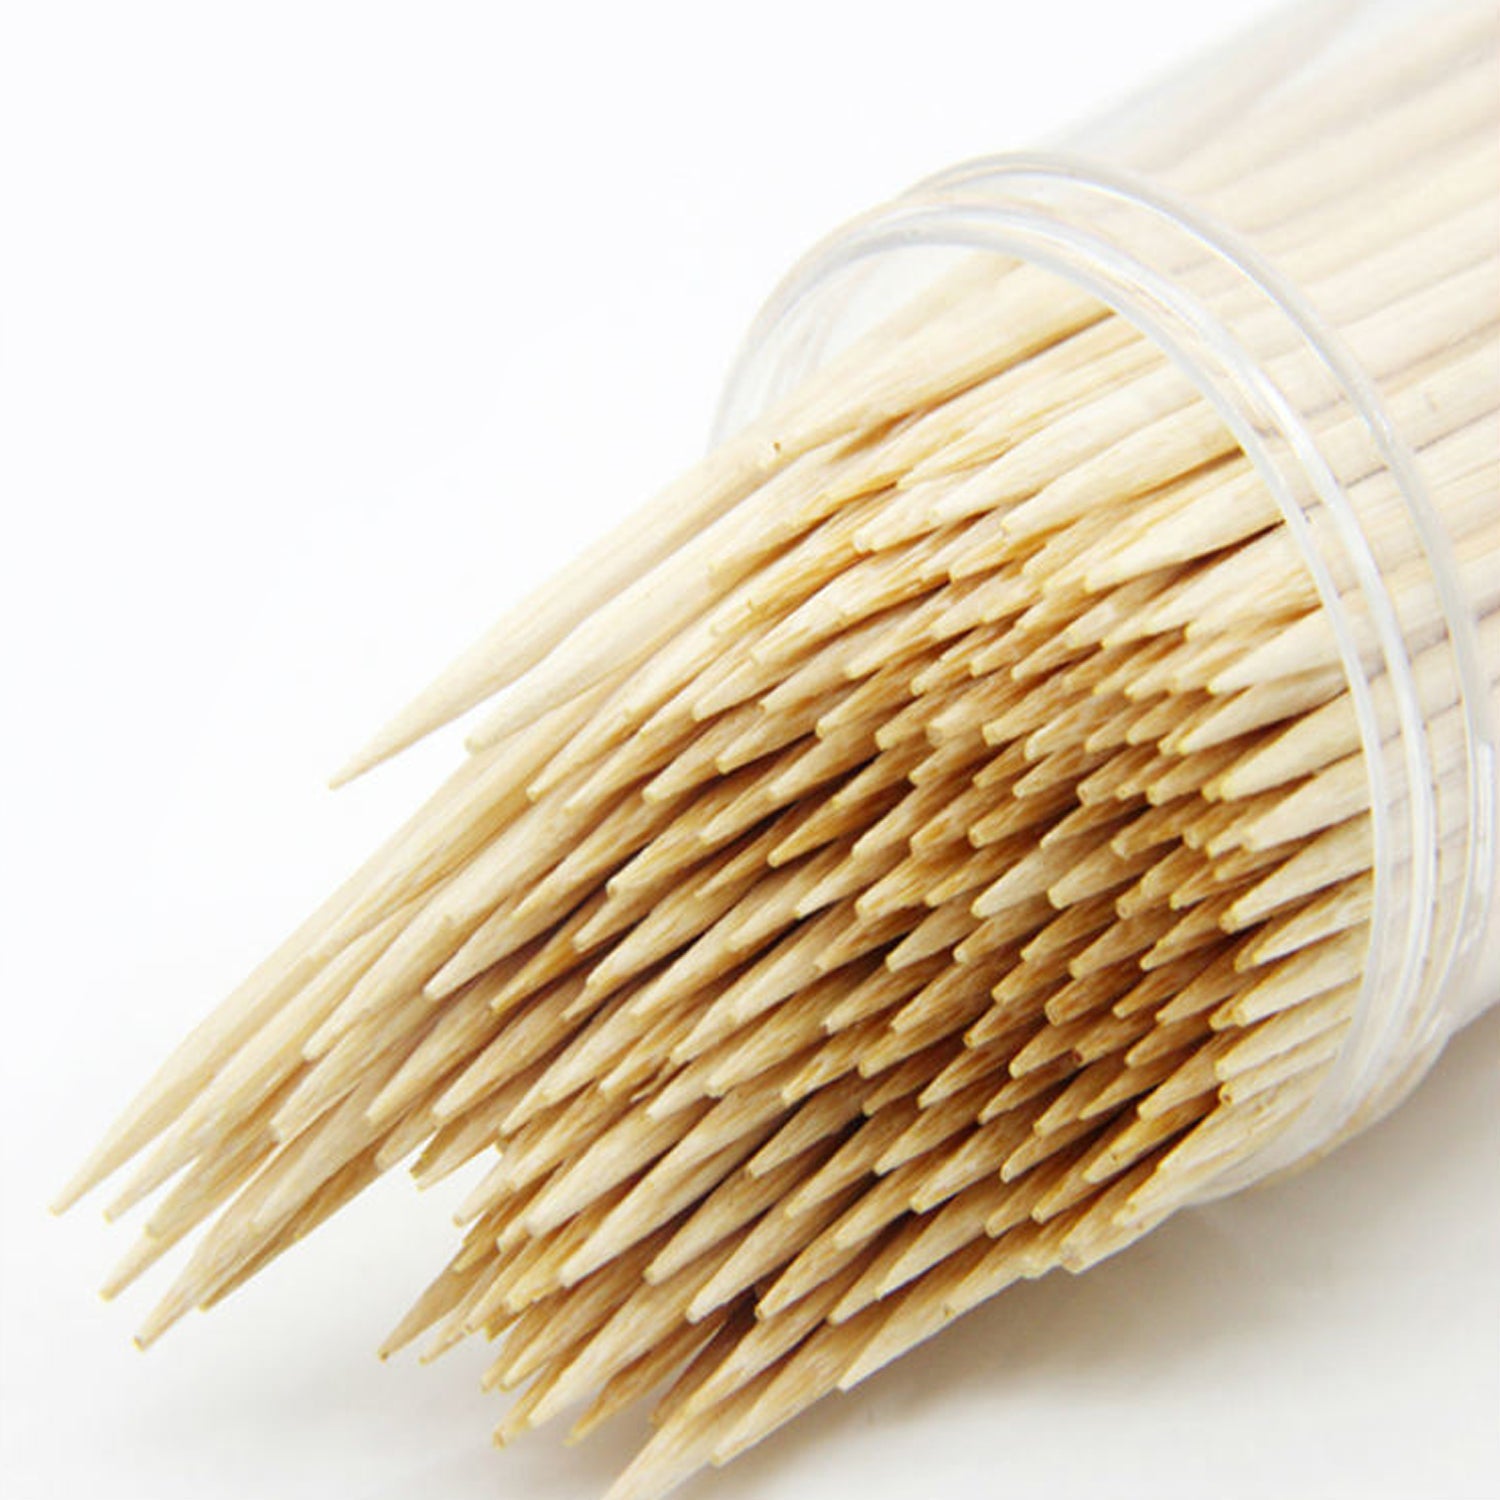 0847 Simple Wooden Toothpicks with Dispenser Box freeshipping - DeoDap